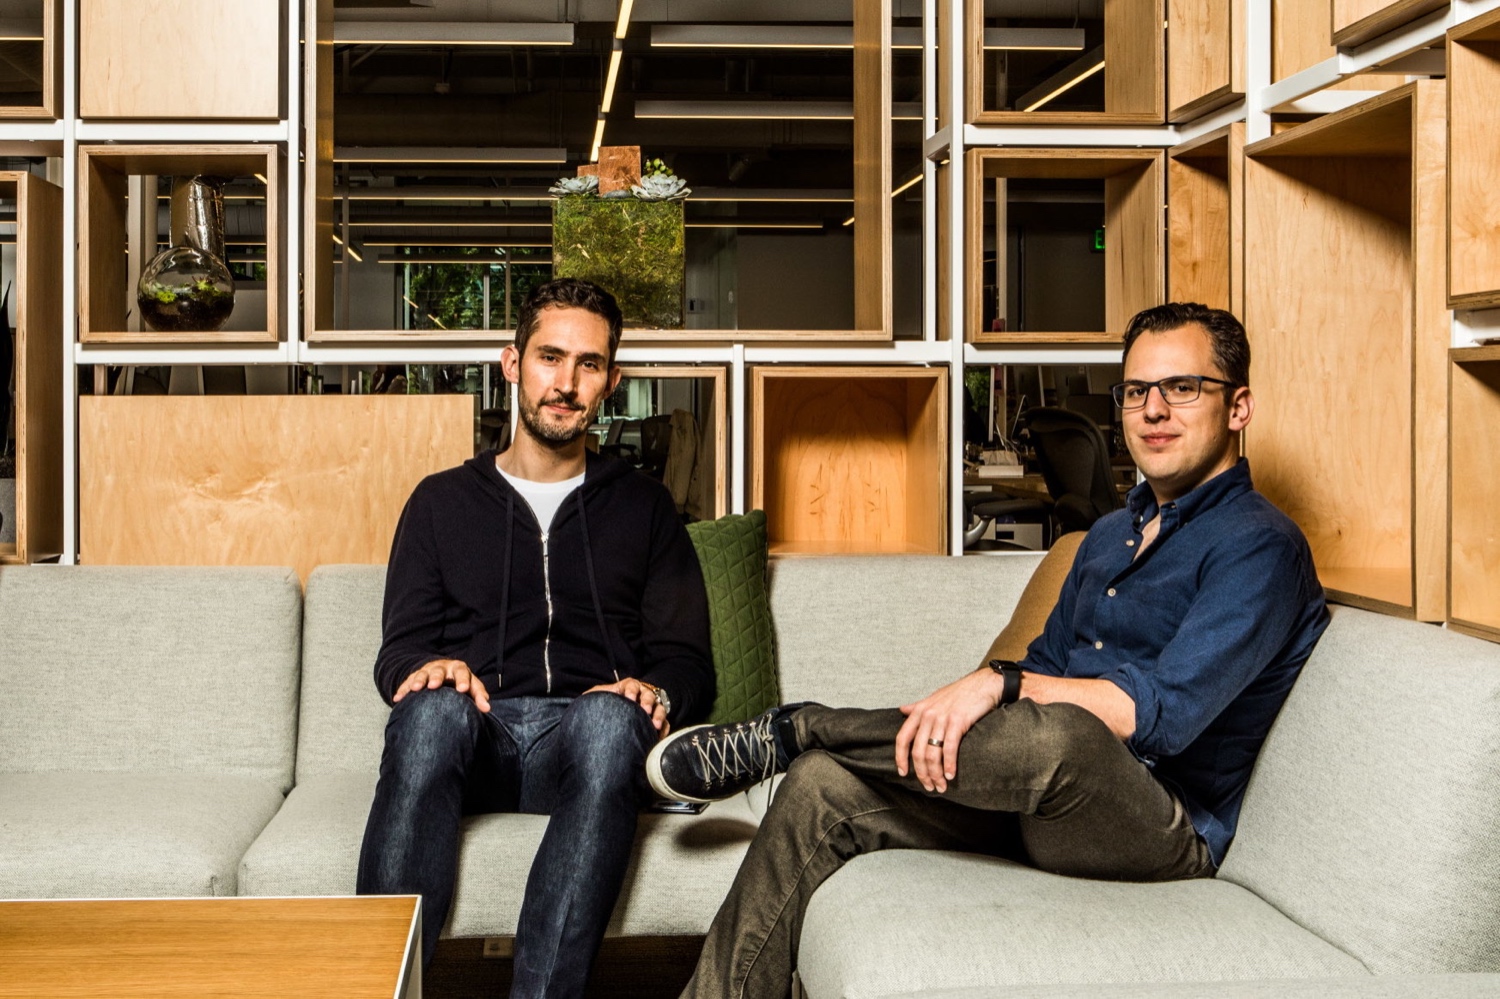 Kevin Systrom, left, and Mike Krieger, the co-founders of Instagram.CreditCreditChristie Hemm Klok for The New York Times